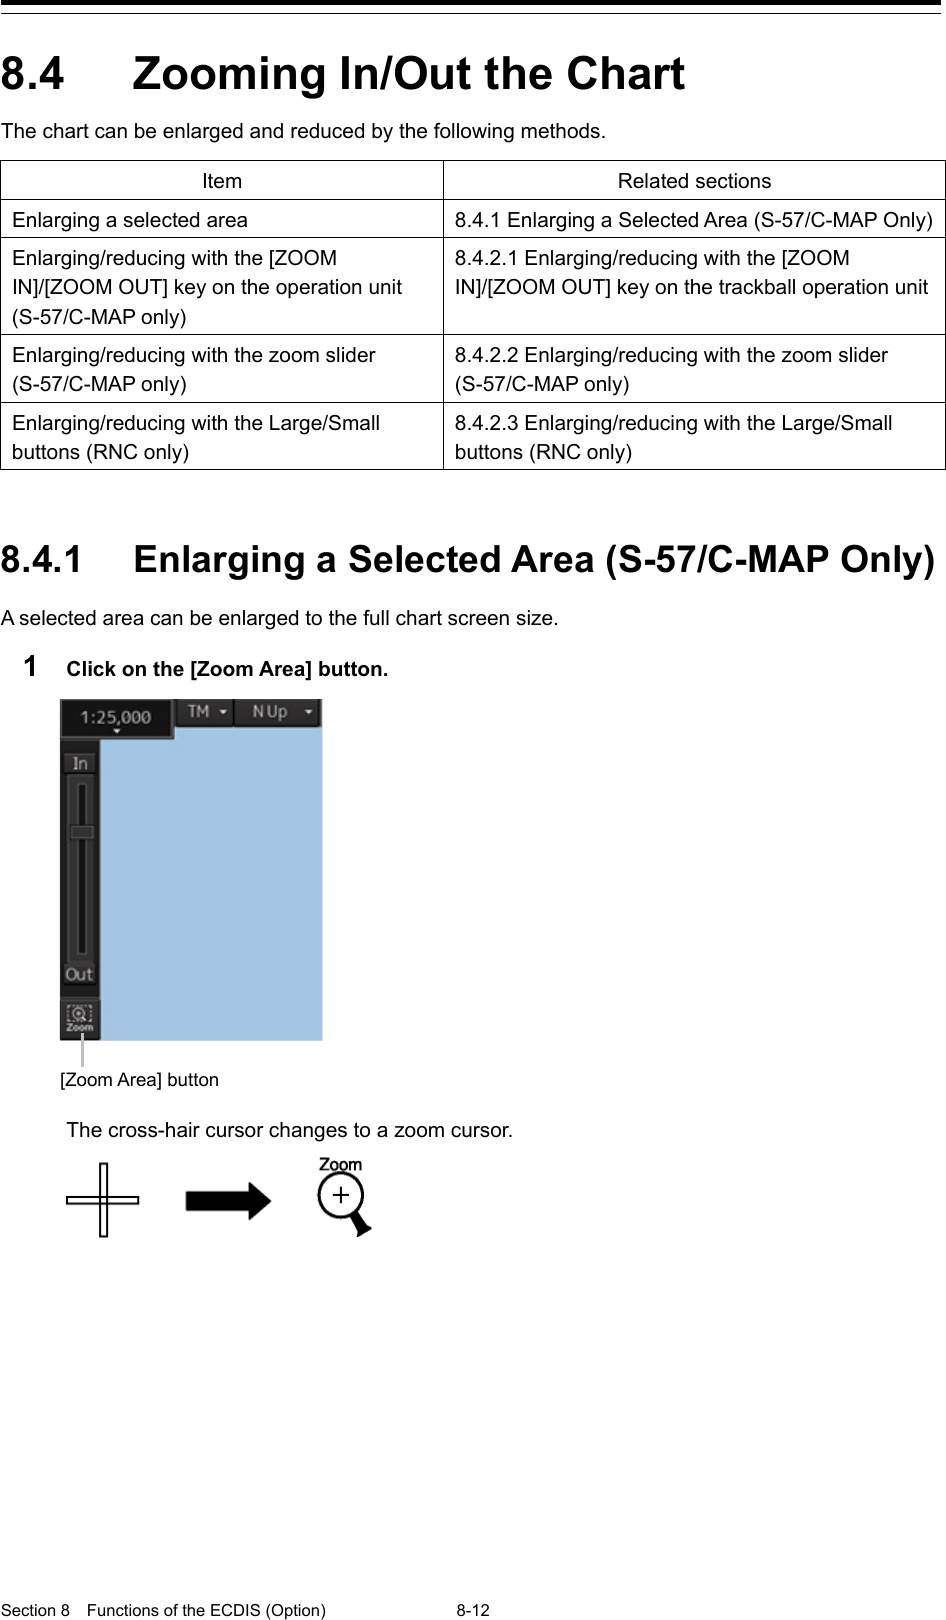  Section 8  Functions of the ECDIS (Option) 8-12  8.4  Zooming In/Out the Chart The chart can be enlarged and reduced by the following methods.  Item Related sections Enlarging a selected area 8.4.1 Enlarging a Selected Area (S-57/C-MAP Only) Enlarging/reducing with the [ZOOM IN]/[ZOOM OUT] key on the operation unit (S-57/C-MAP only) 8.4.2.1 Enlarging/reducing with the [ZOOM IN]/[ZOOM OUT] key on the trackball operation unit Enlarging/reducing with the zoom slider (S-57/C-MAP only) 8.4.2.2 Enlarging/reducing with the zoom slider (S-57/C-MAP only) Enlarging/reducing with the Large/Small buttons (RNC only) 8.4.2.3 Enlarging/reducing with the Large/Small buttons (RNC only)   8.4.1 Enlarging a Selected Area (S-57/C-MAP Only) A selected area can be enlarged to the full chart screen size. 1  Click on the [Zoom Area] button.  The cross-hair cursor changes to a zoom cursor.    [Zoom Area] button 